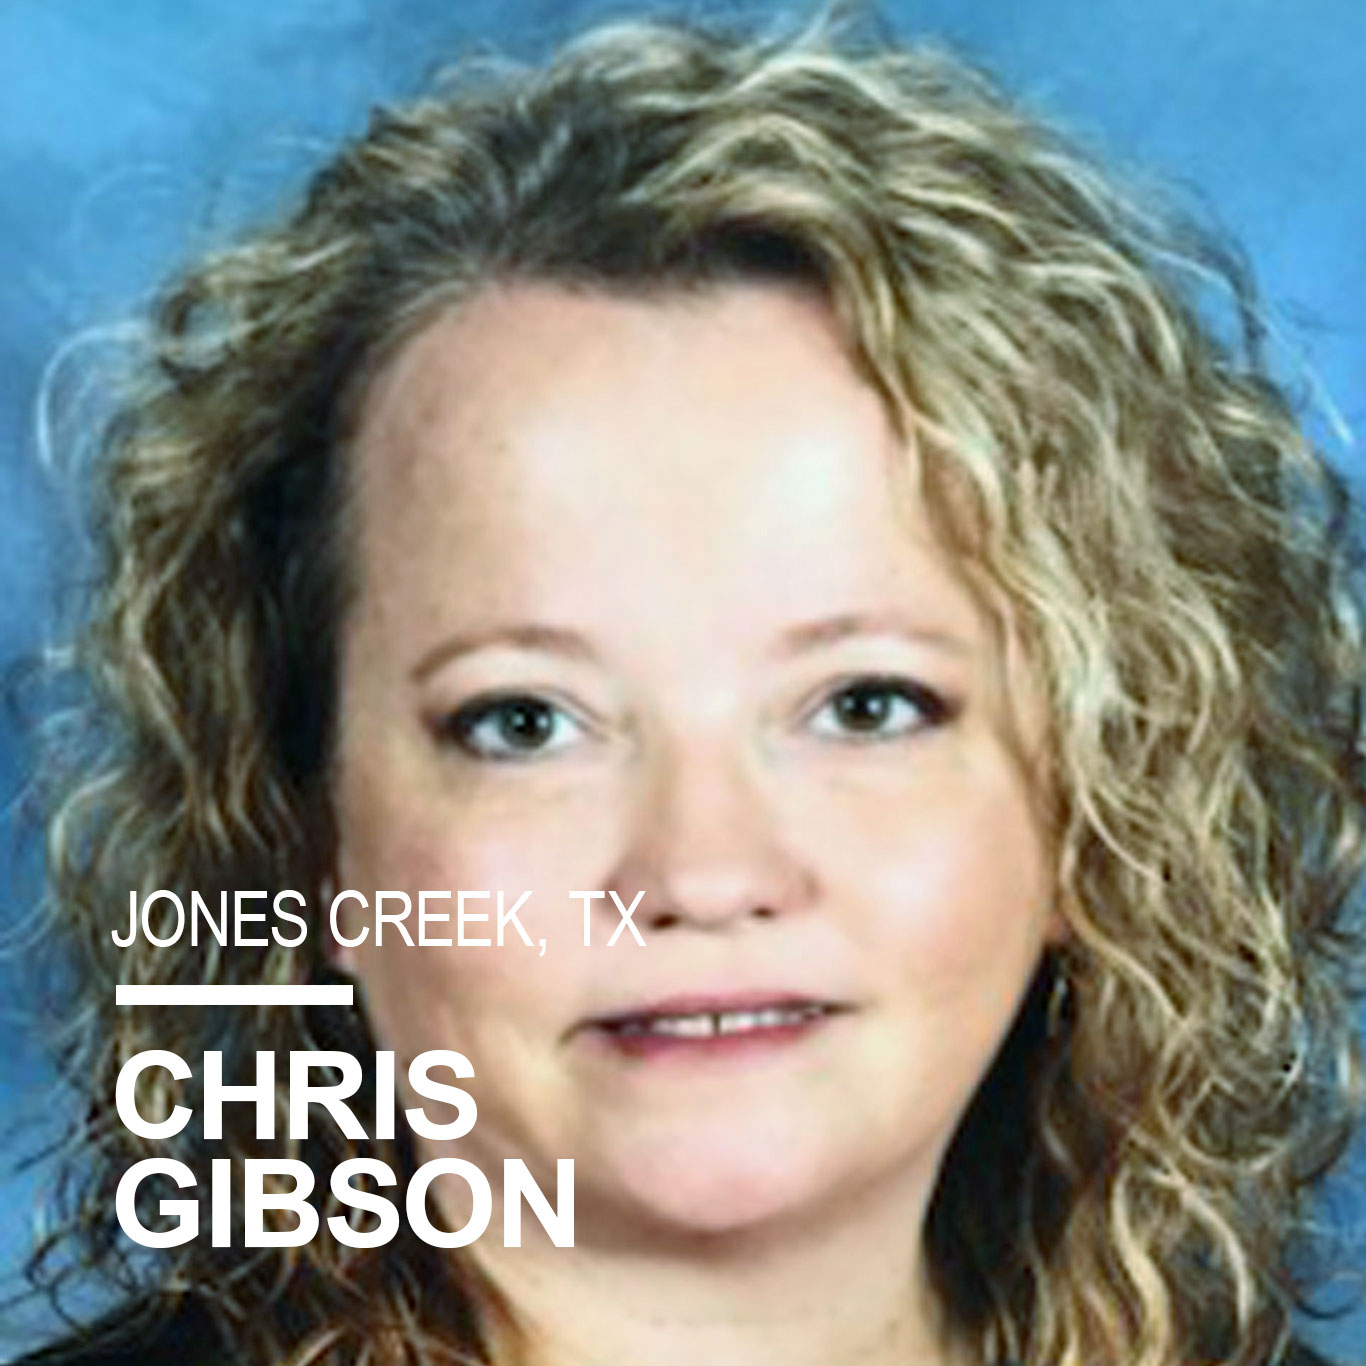 Chris Gibson is the STREAM lab teacher for PreK-5 and teaches a sixth-grade robotics class at S.F. Austin STEM Academy in Jones Creek, TX. She’s currently in her 19th year of teaching and is passionate about providing hands-on STEM and 21st-century learning experiences for every student at the school. Chris was a presenter at the 2017 Texas State STEM Conference and was named the S.F. Austin Elementary Teacher of the Year. In 2021, she received the National Certificate for STEM Teaching from the National Institute for STEM Education (NISE).